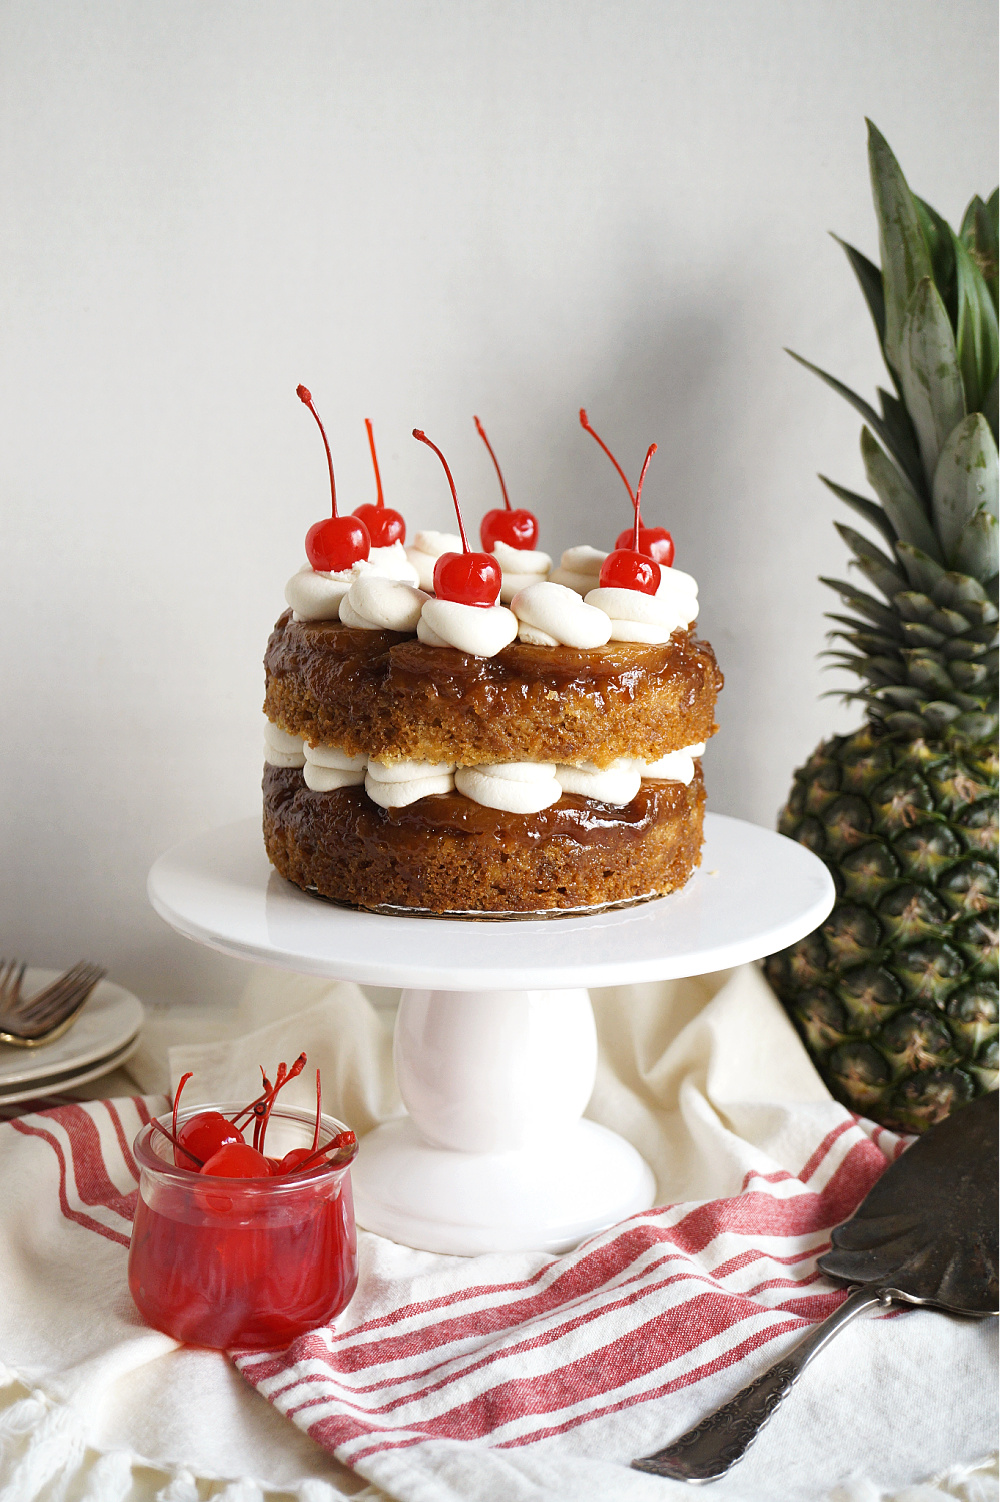 Pineapple and ginger upside-down cake - Recipes - delicious.com.au